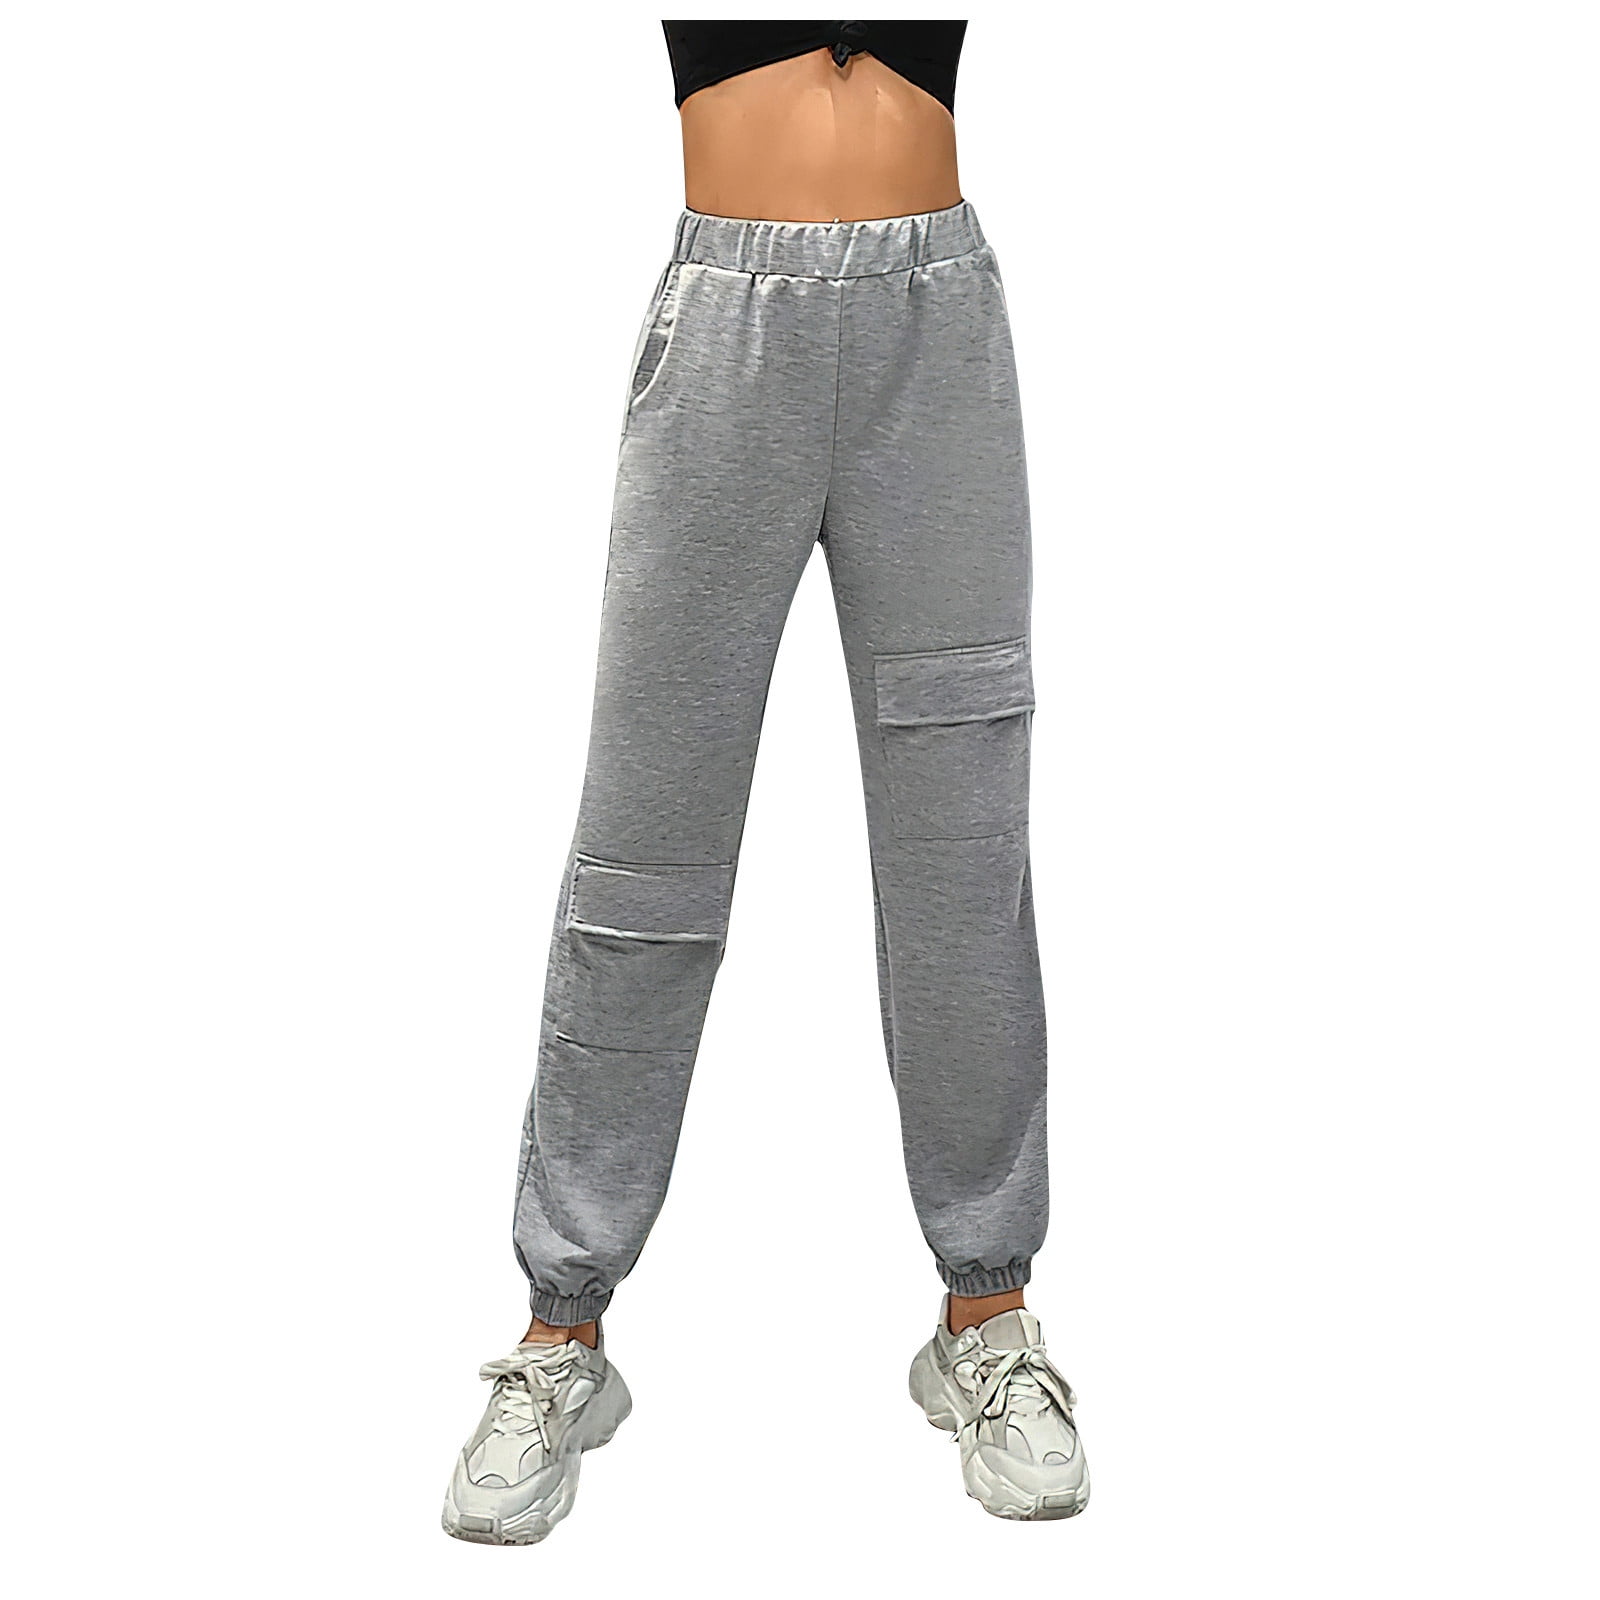 kqetty Sweat Pants Women's Solid Color Comfortable Fall and Winter